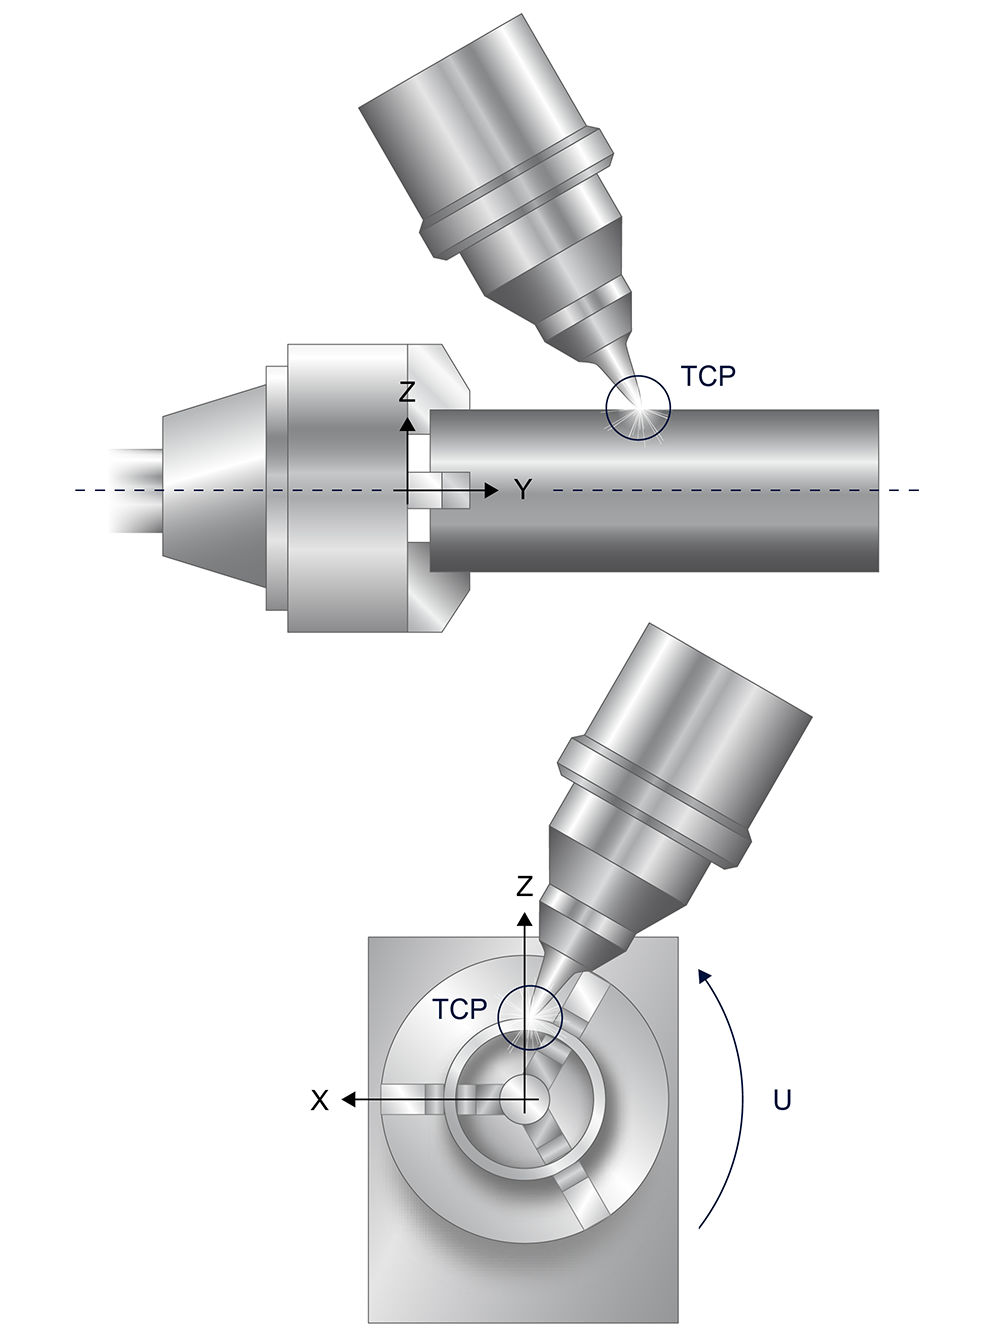 TCP rotates about the tube centre axis, tube top point